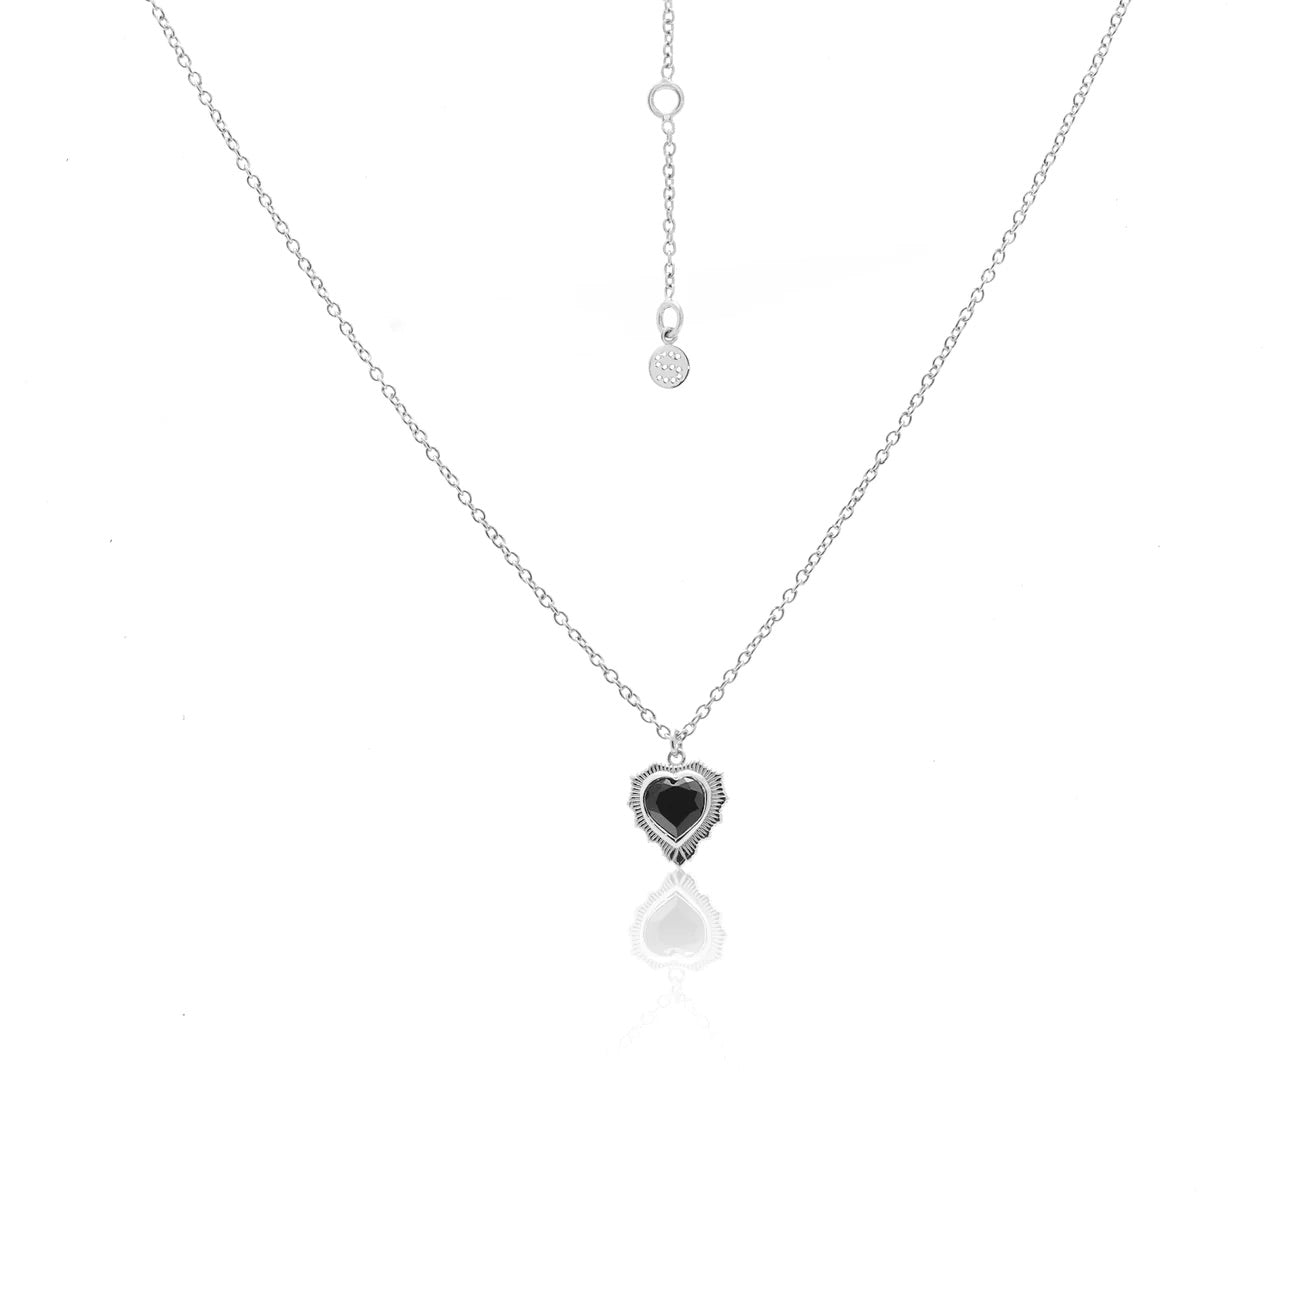 Amour Necklace By Silk & Steel - Black/Silver